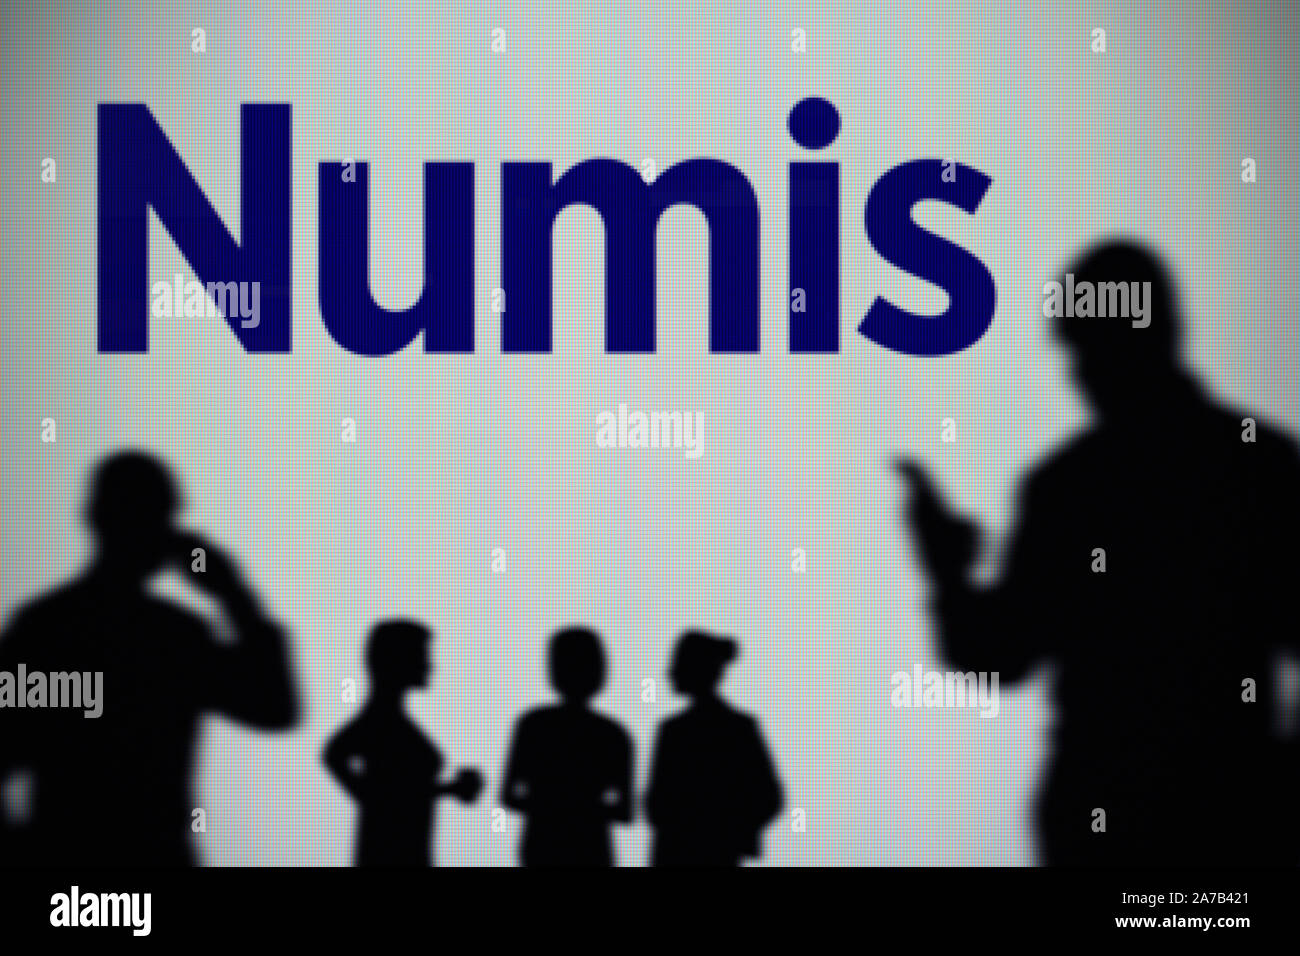 The Numis Securities logo is seen on an LED screen in the background while a silhouetted person uses a smartphone (Editorial use only) Stock Photo